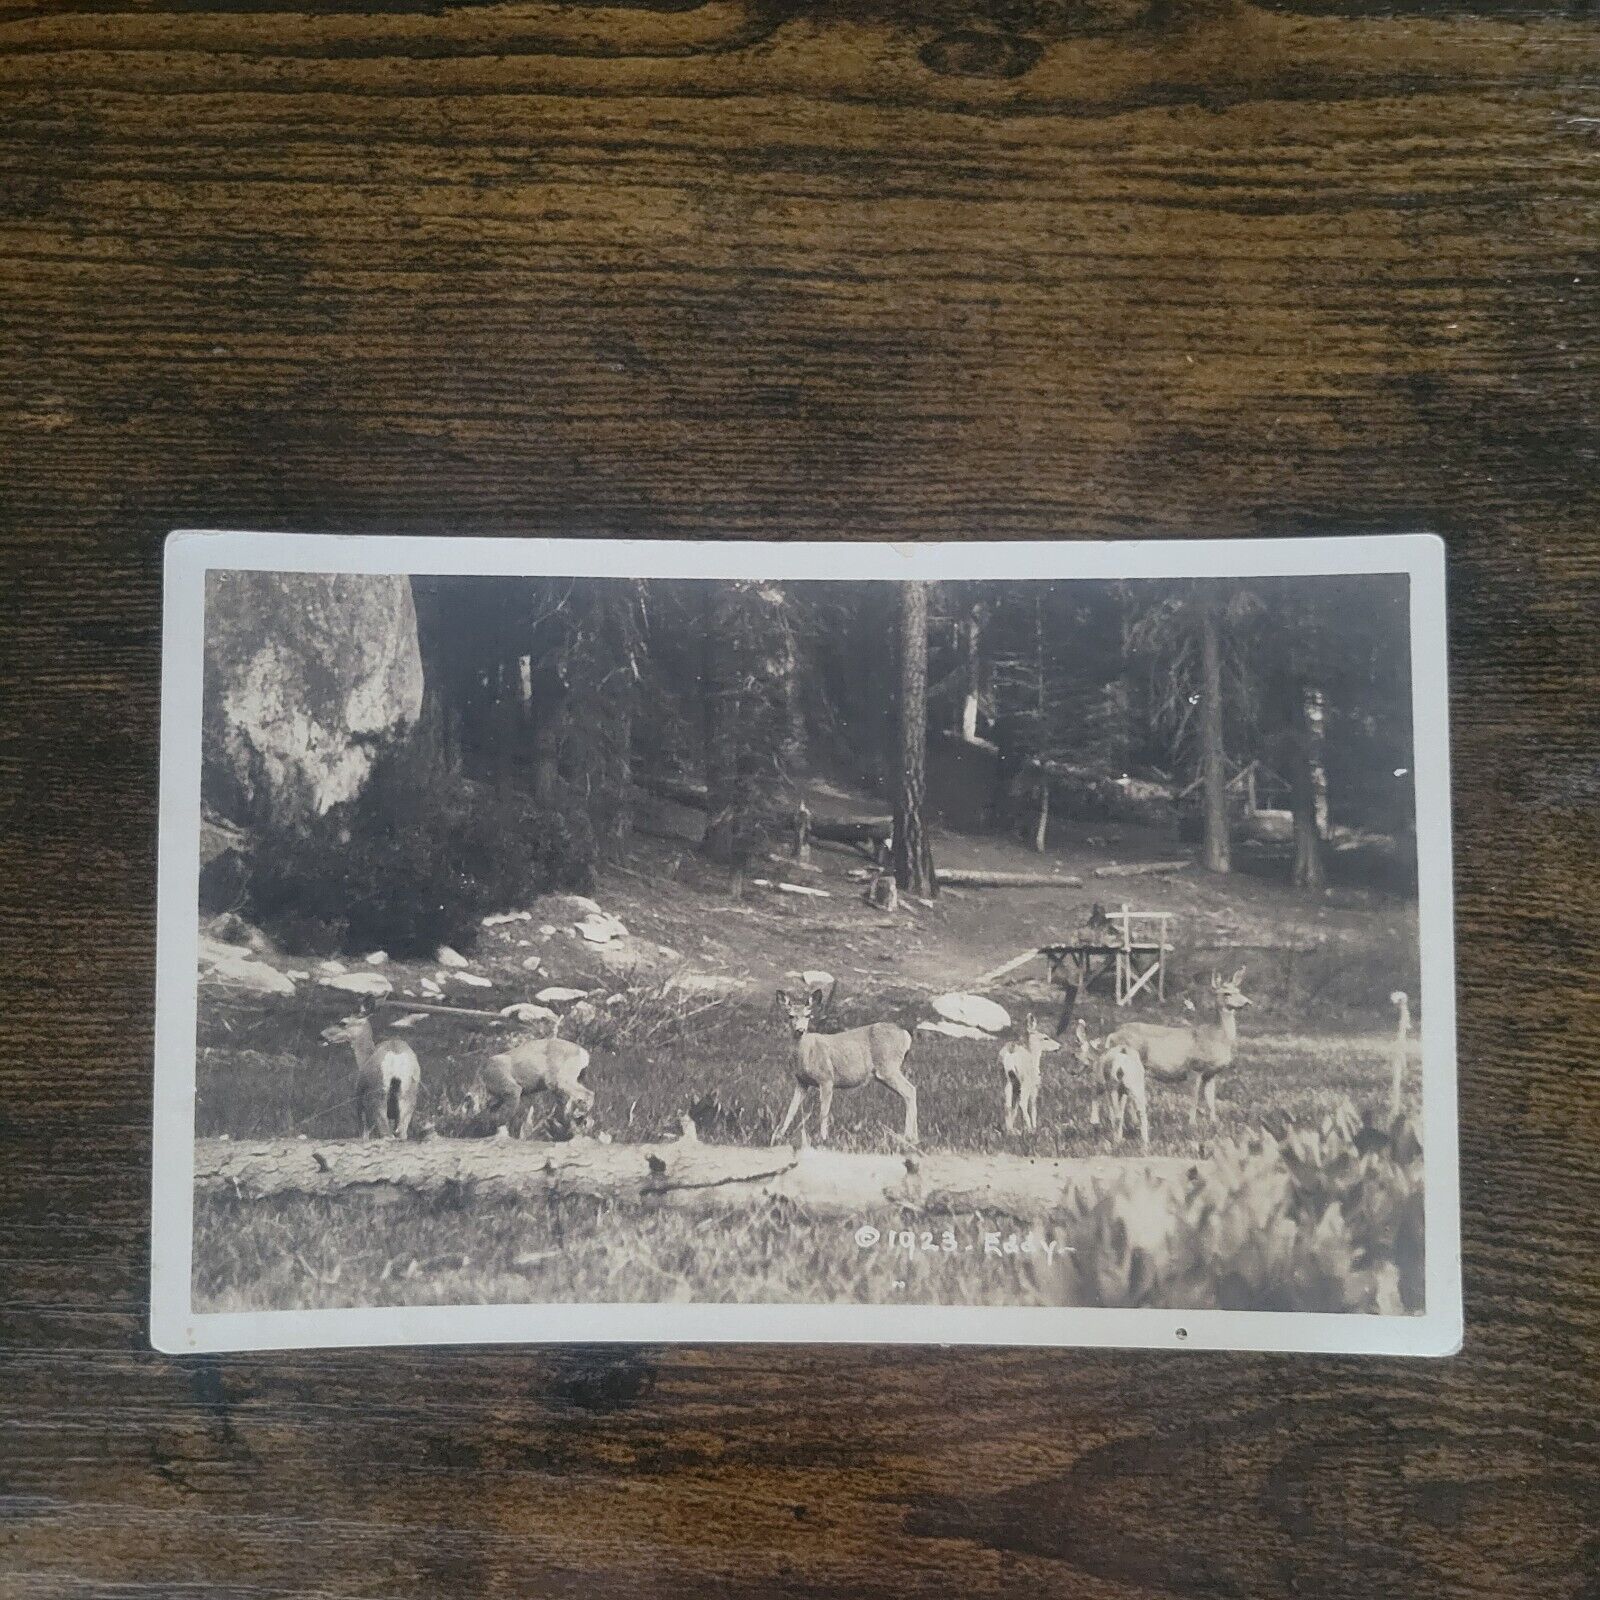 Antique RPPC California Forrest Family Of Deer 1923 by Eddy